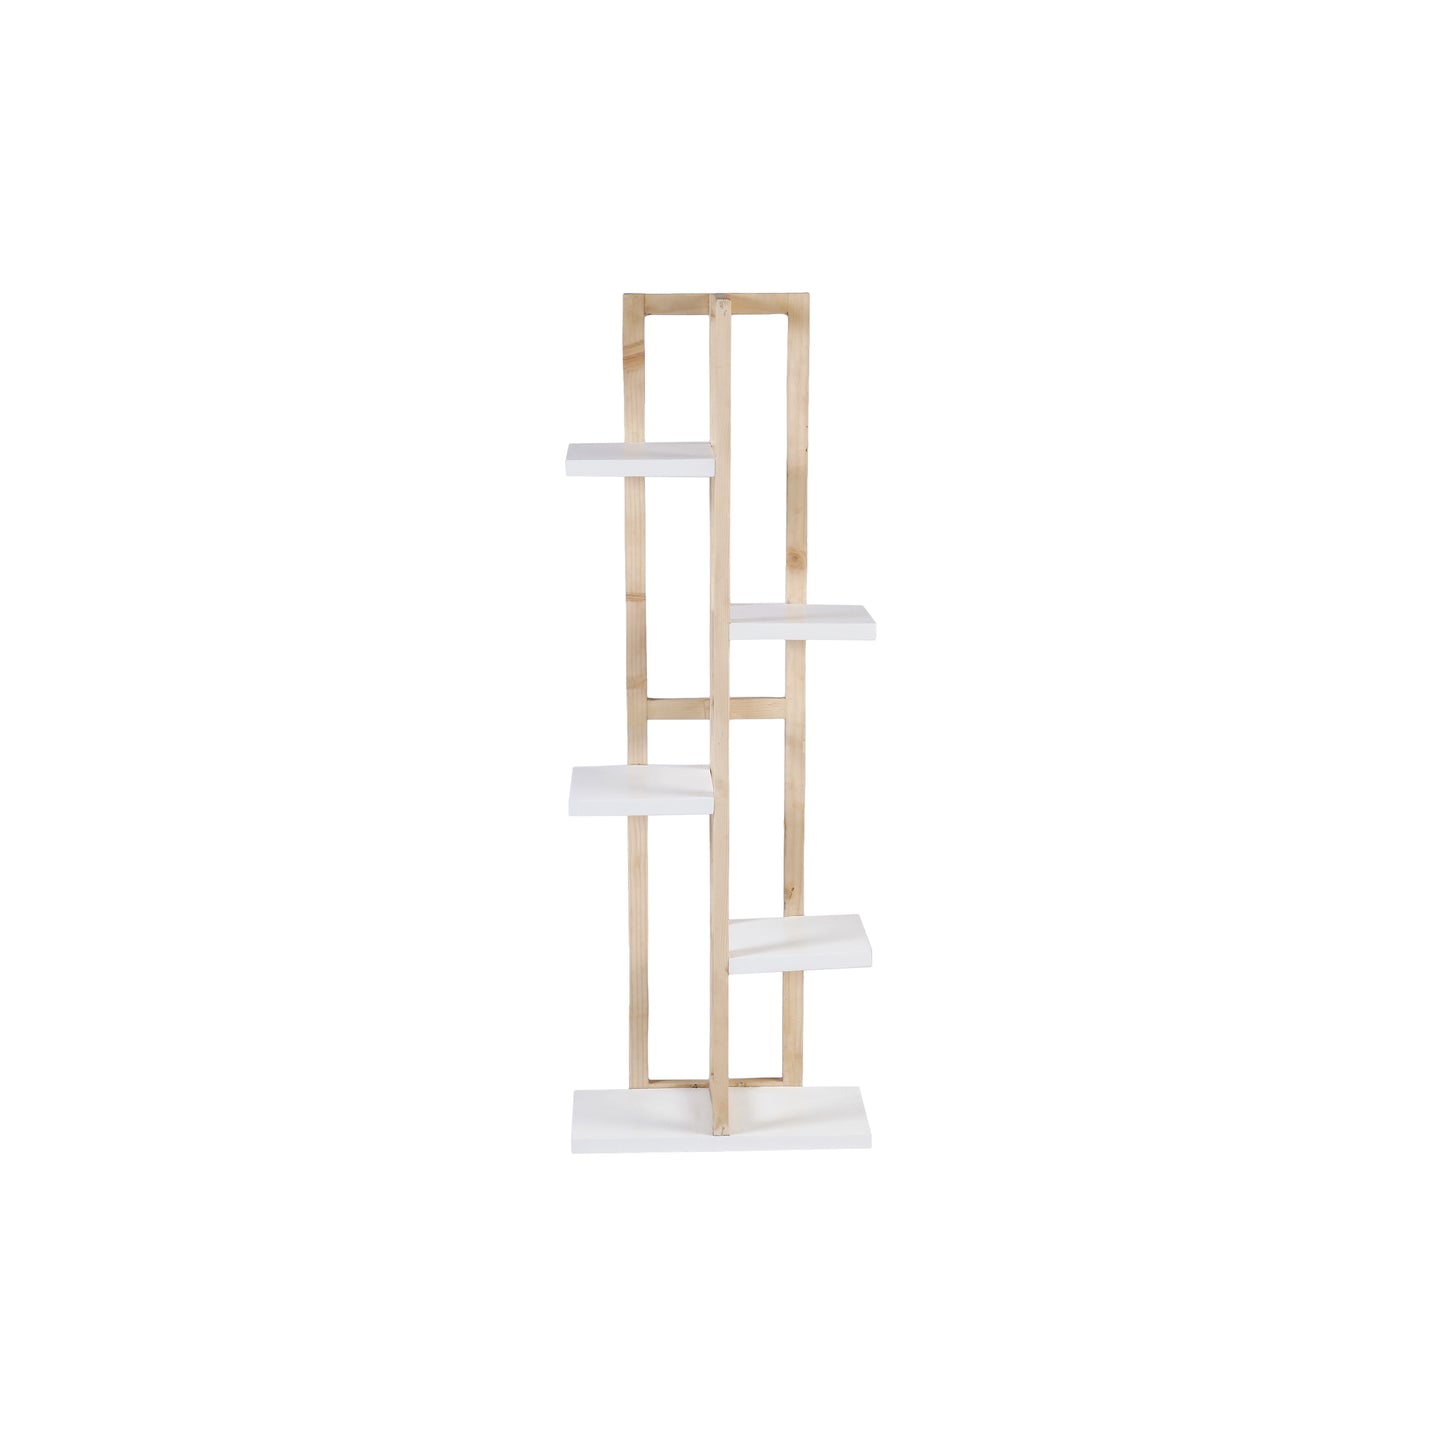 A Tiny MistakeAll Purpose Five Tier Stand (One Piece) (For Planters, Ornaments and Accessories) (Natural Pine Wood Stand with White Planks)